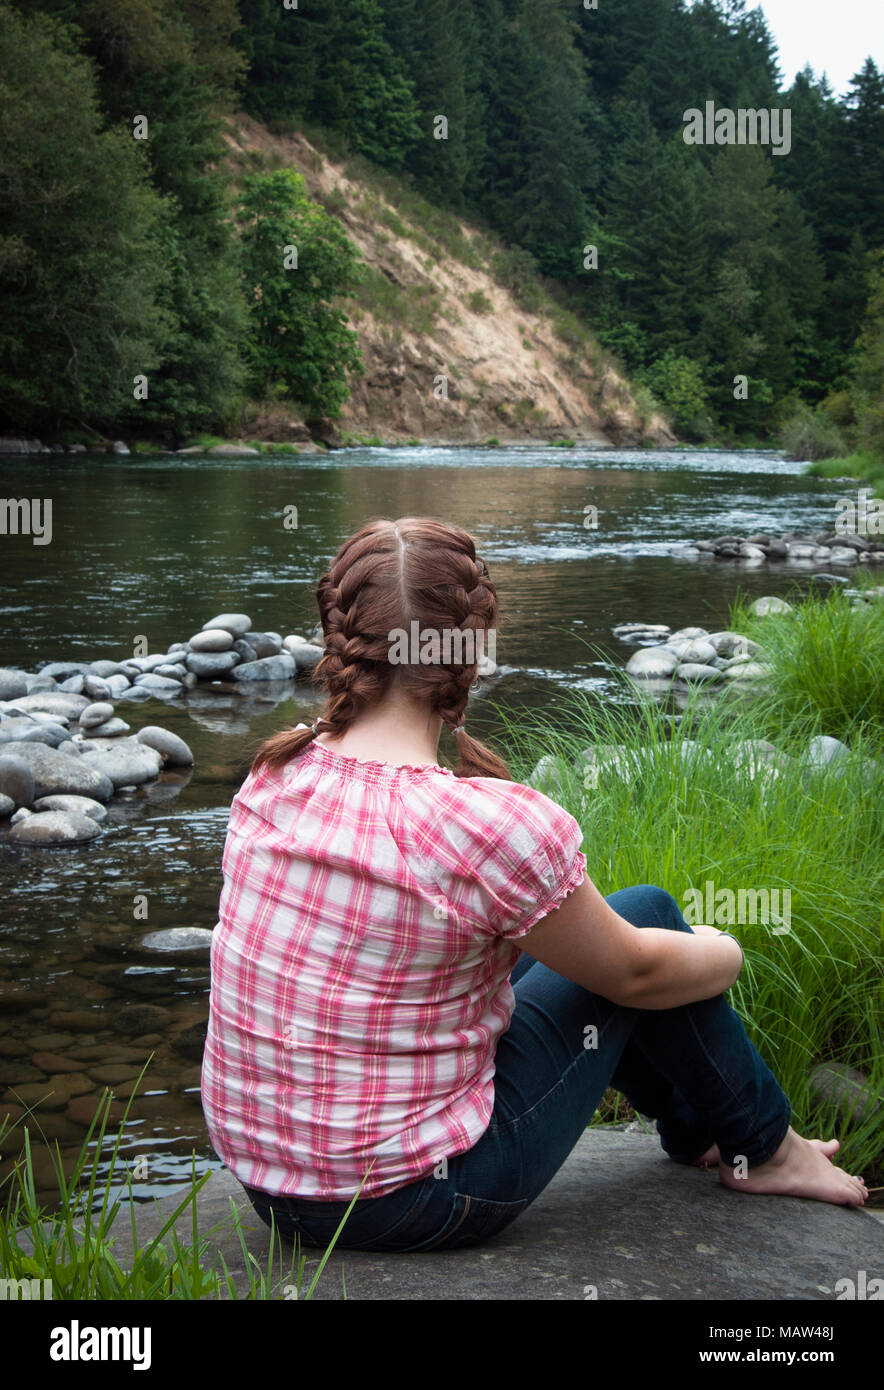 A young girl looking at a river. Stock Photo